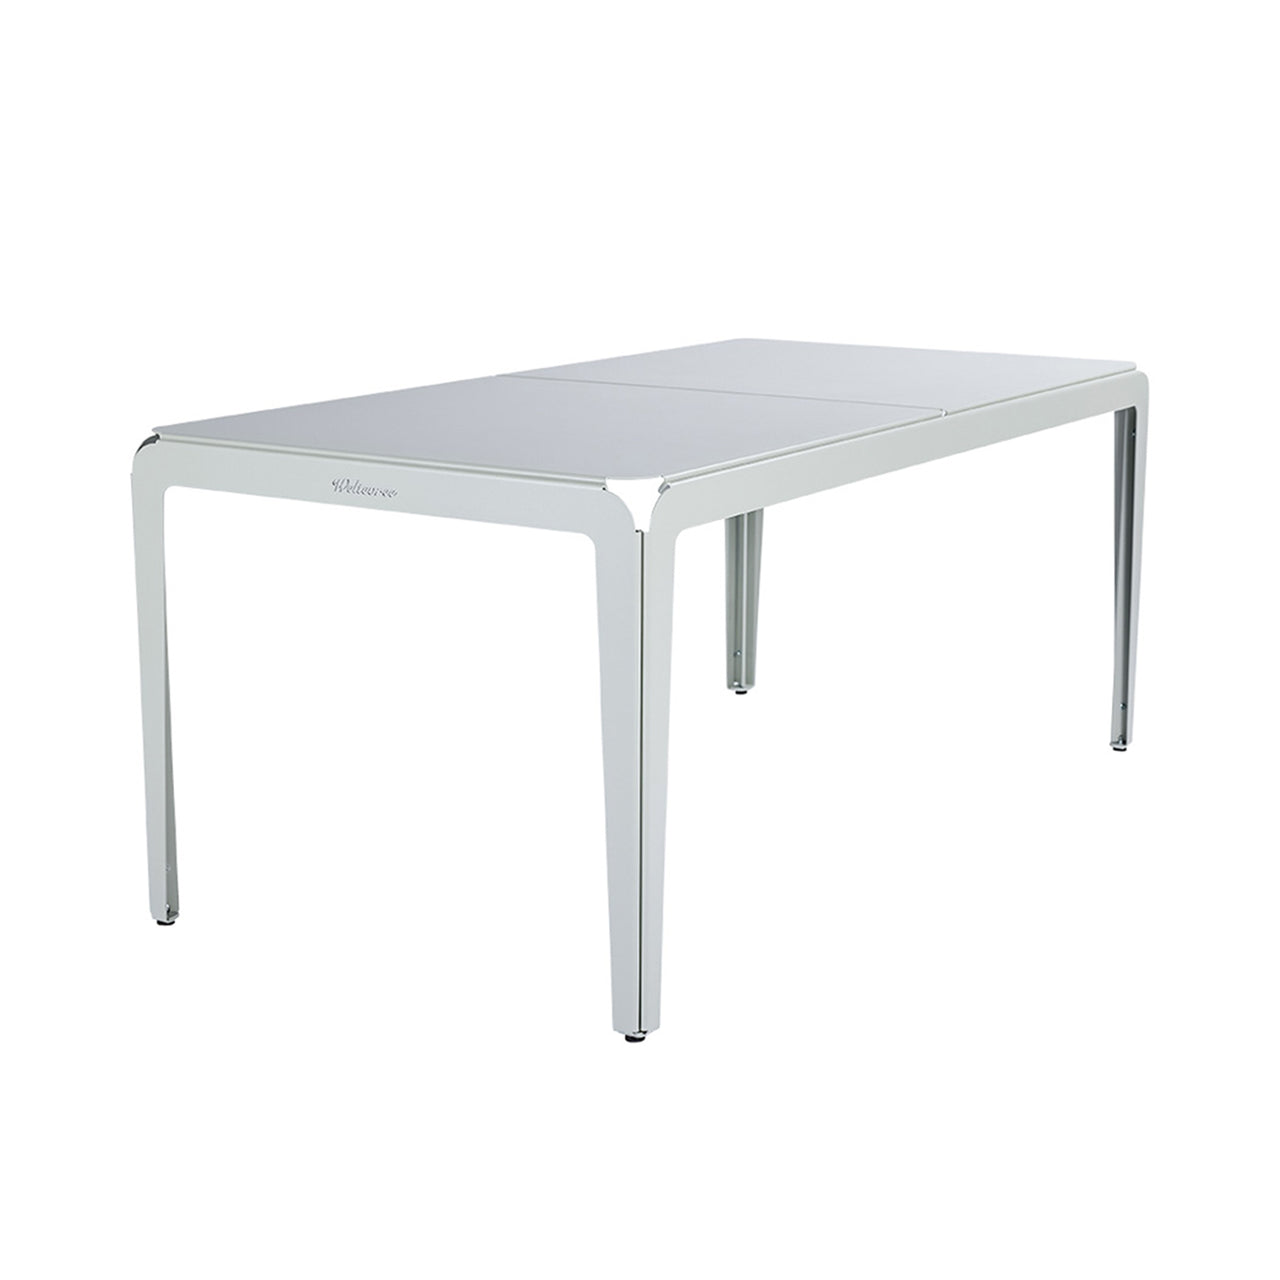 Bended Table: Outdoor + Medium - 70.9